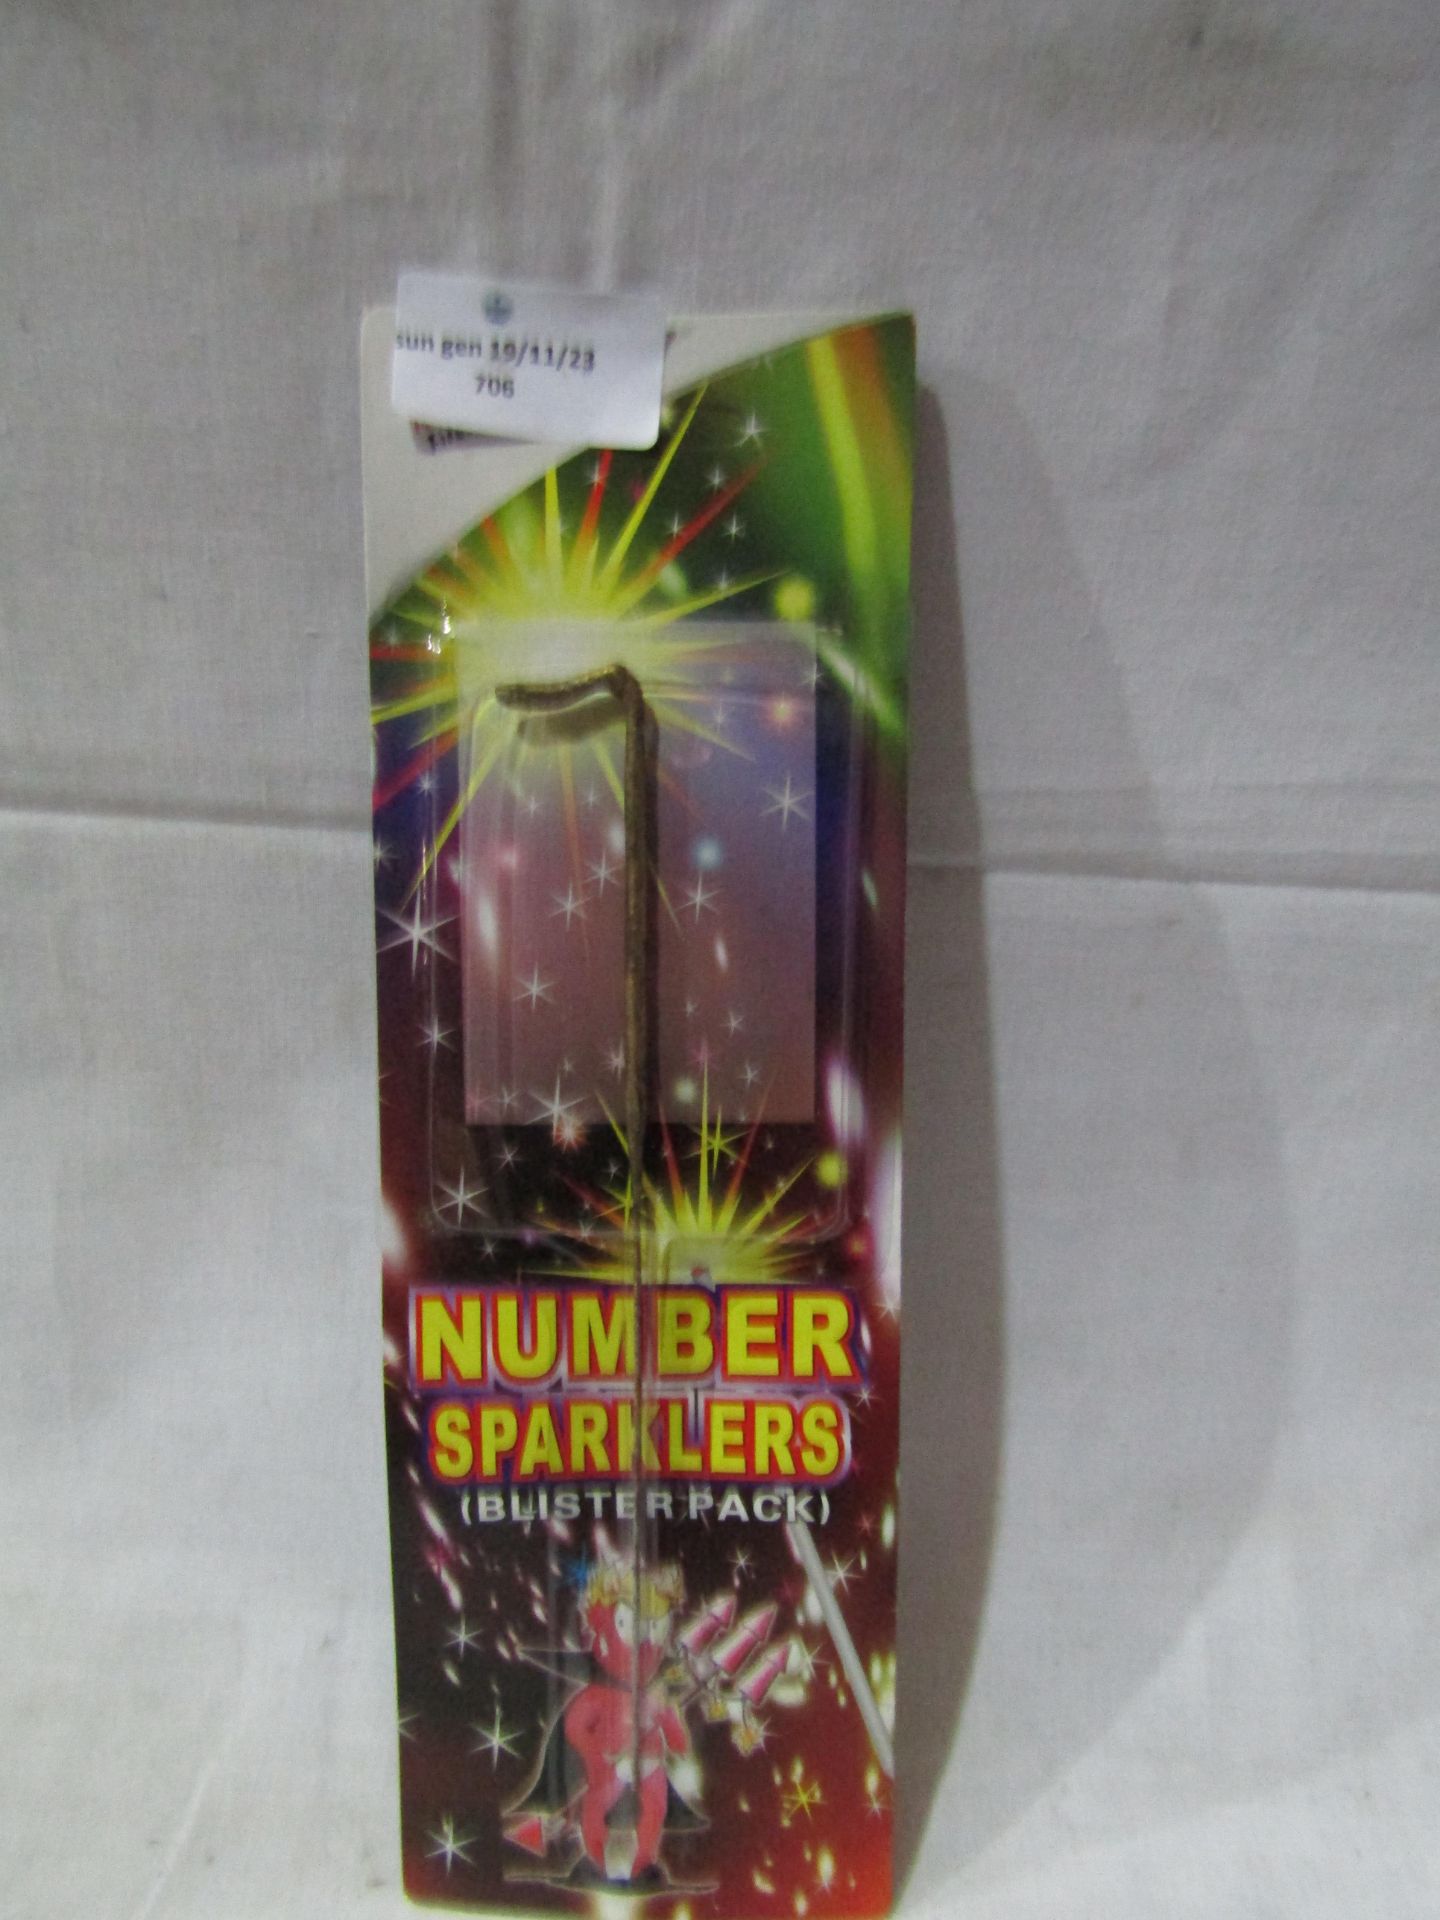 2 X Boxes Containing 20 in Total No 1 Sparklers For cakes New & Boxed